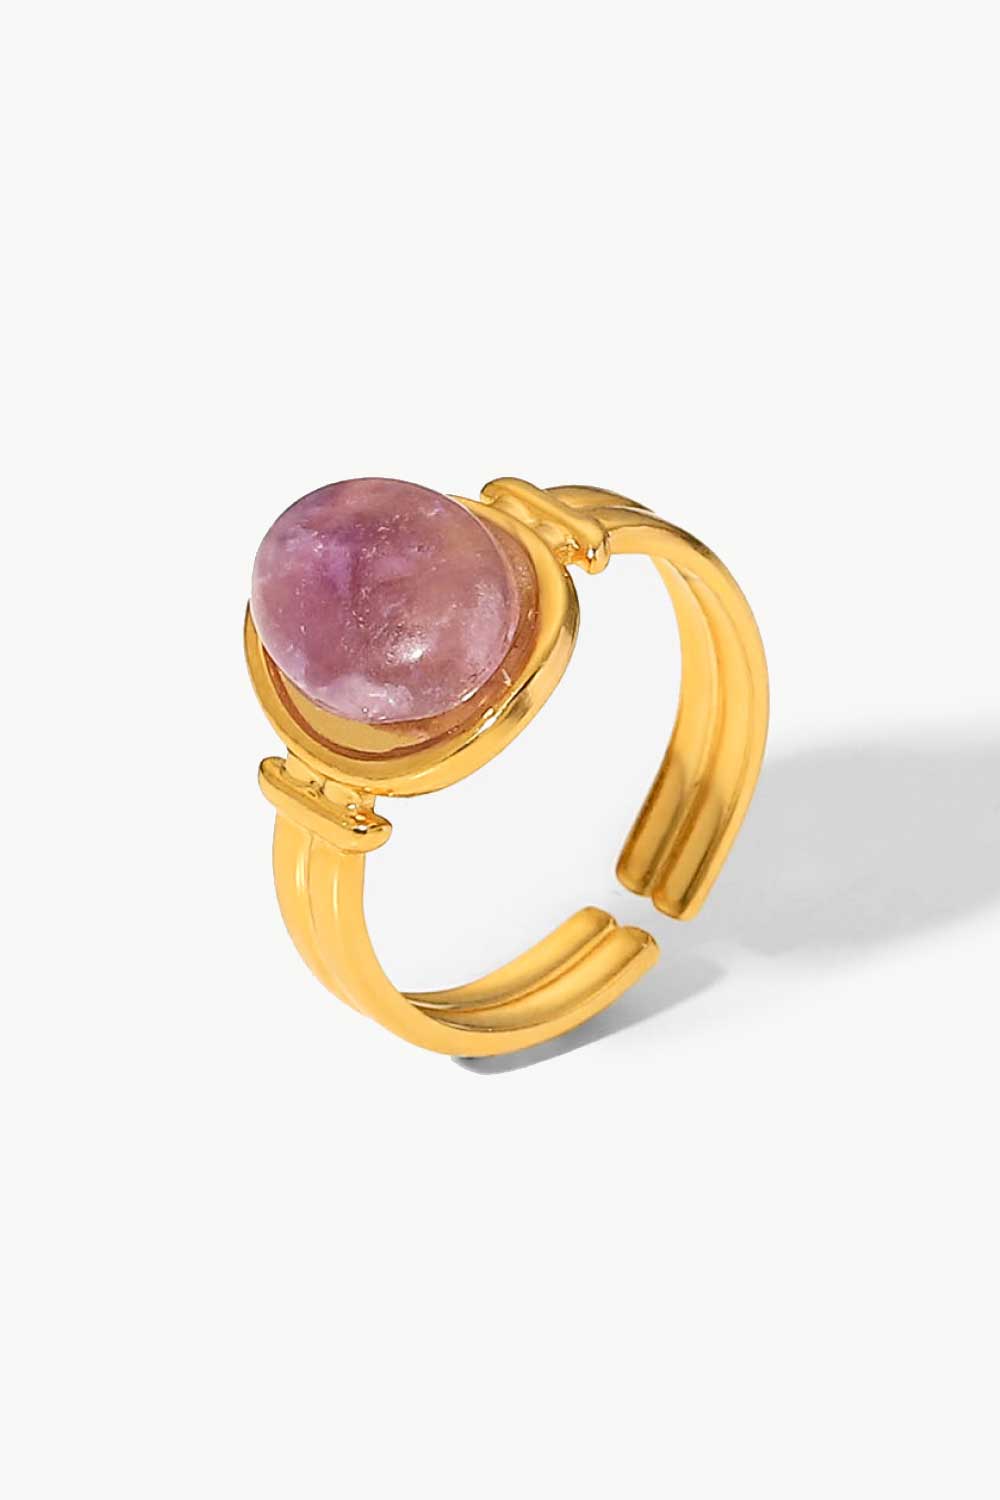 18K Gold Plated Open Ring - PINKCOLADA--100100577923035